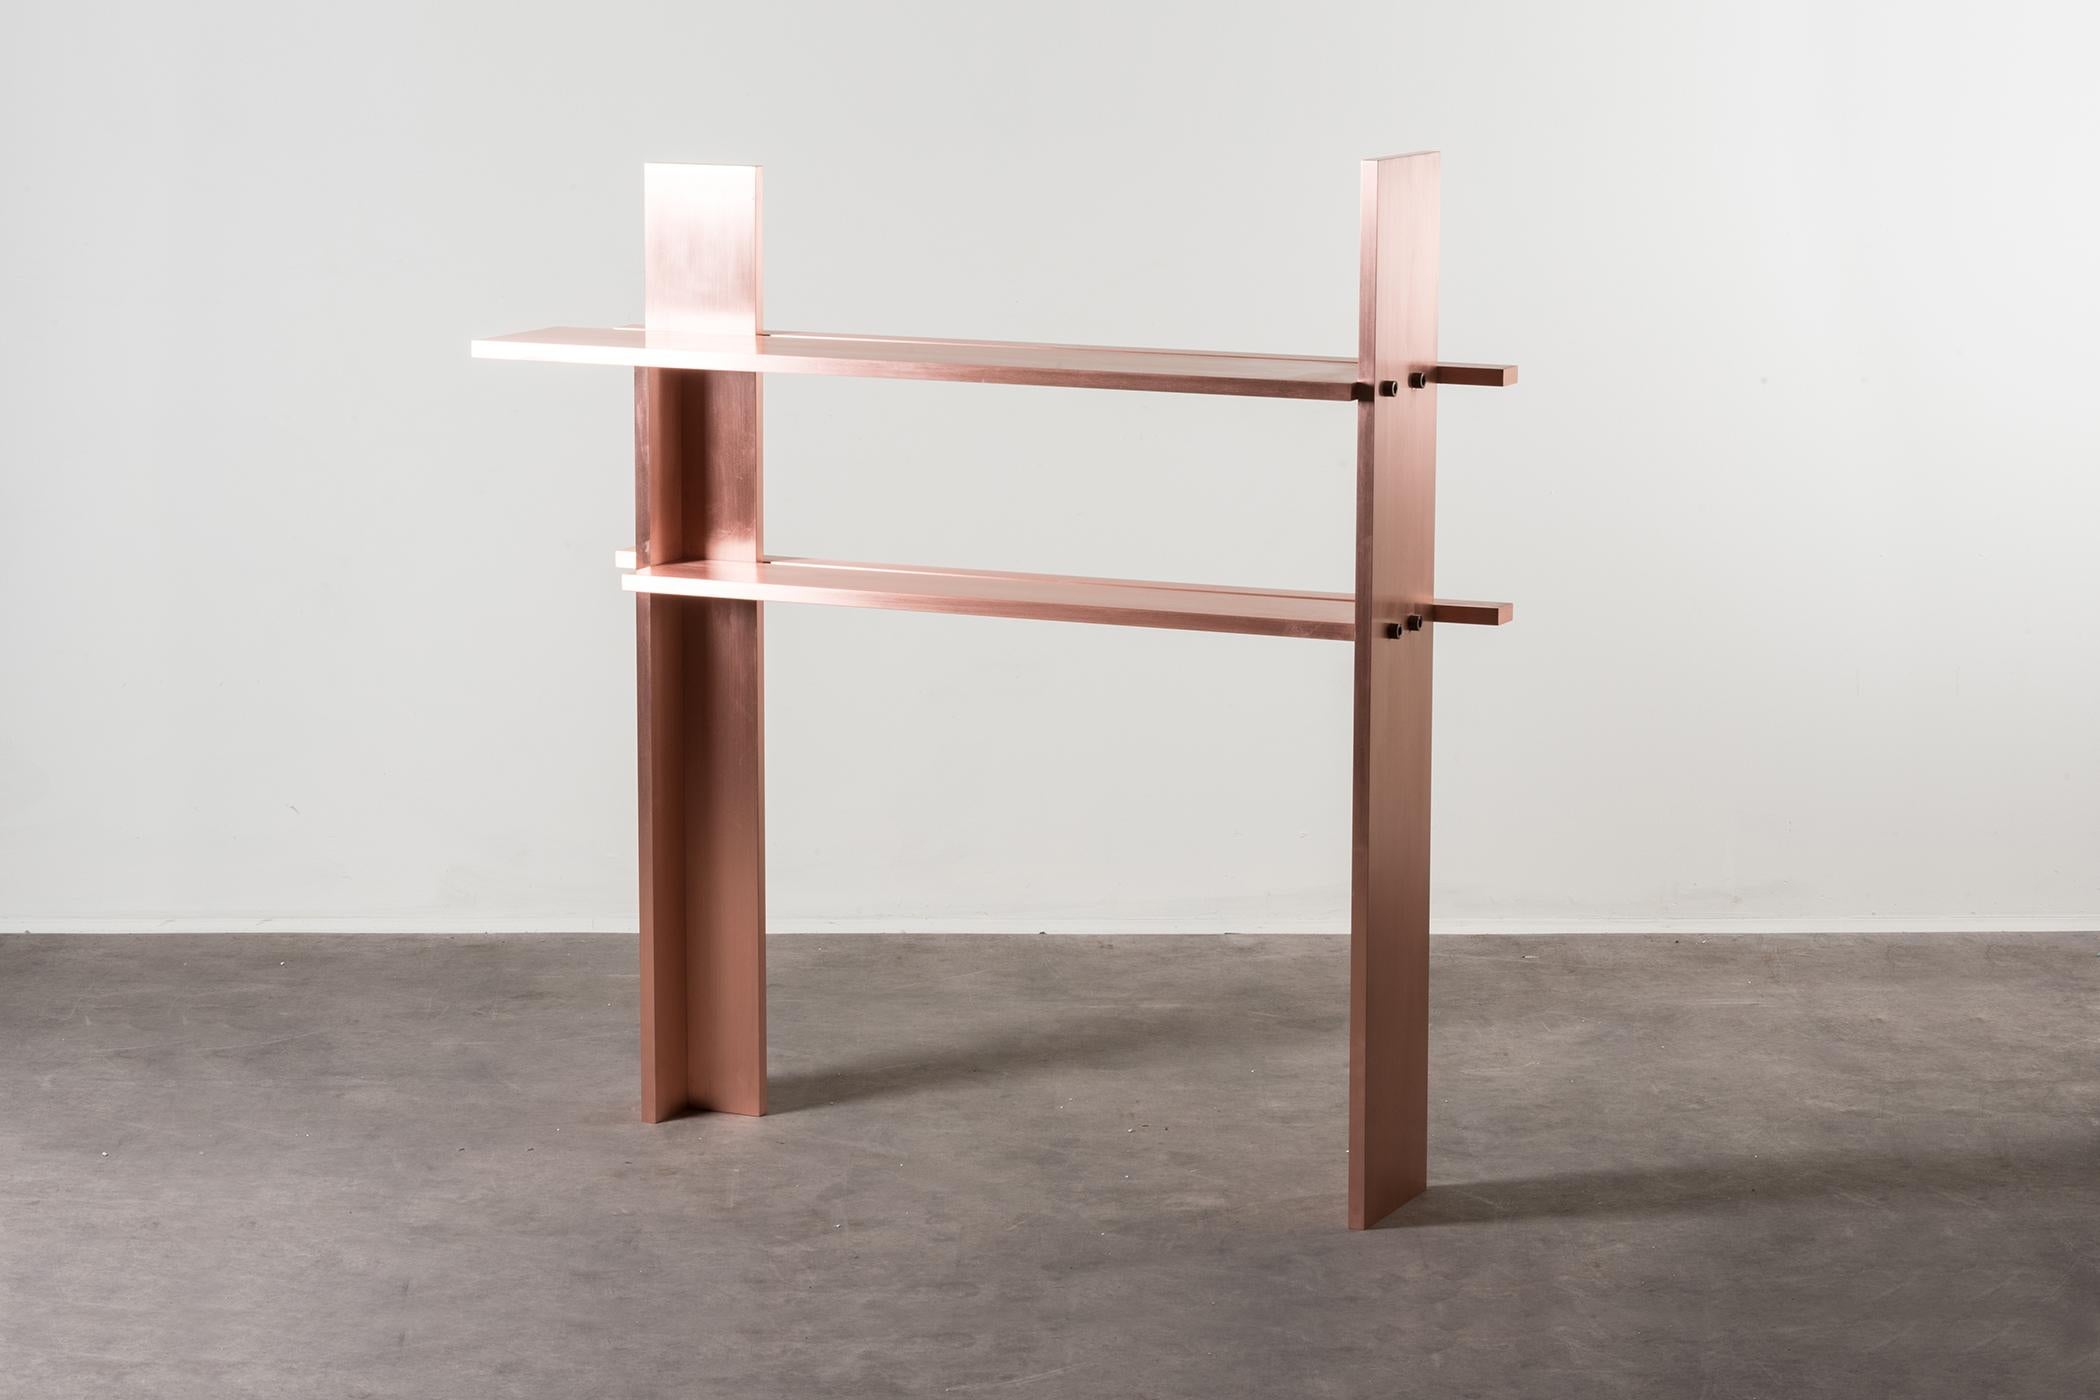 Console CC03 by Johan Viladrich, the Netherlands, 2019. Nilufar edition. Brushed copper. Measures: 115 x 27 x H 120 cm, 45.2 x 10.6 x 47.2 in. The CC03 console is made of seven brushed copper plates, assembled together with tempered steel bolts.